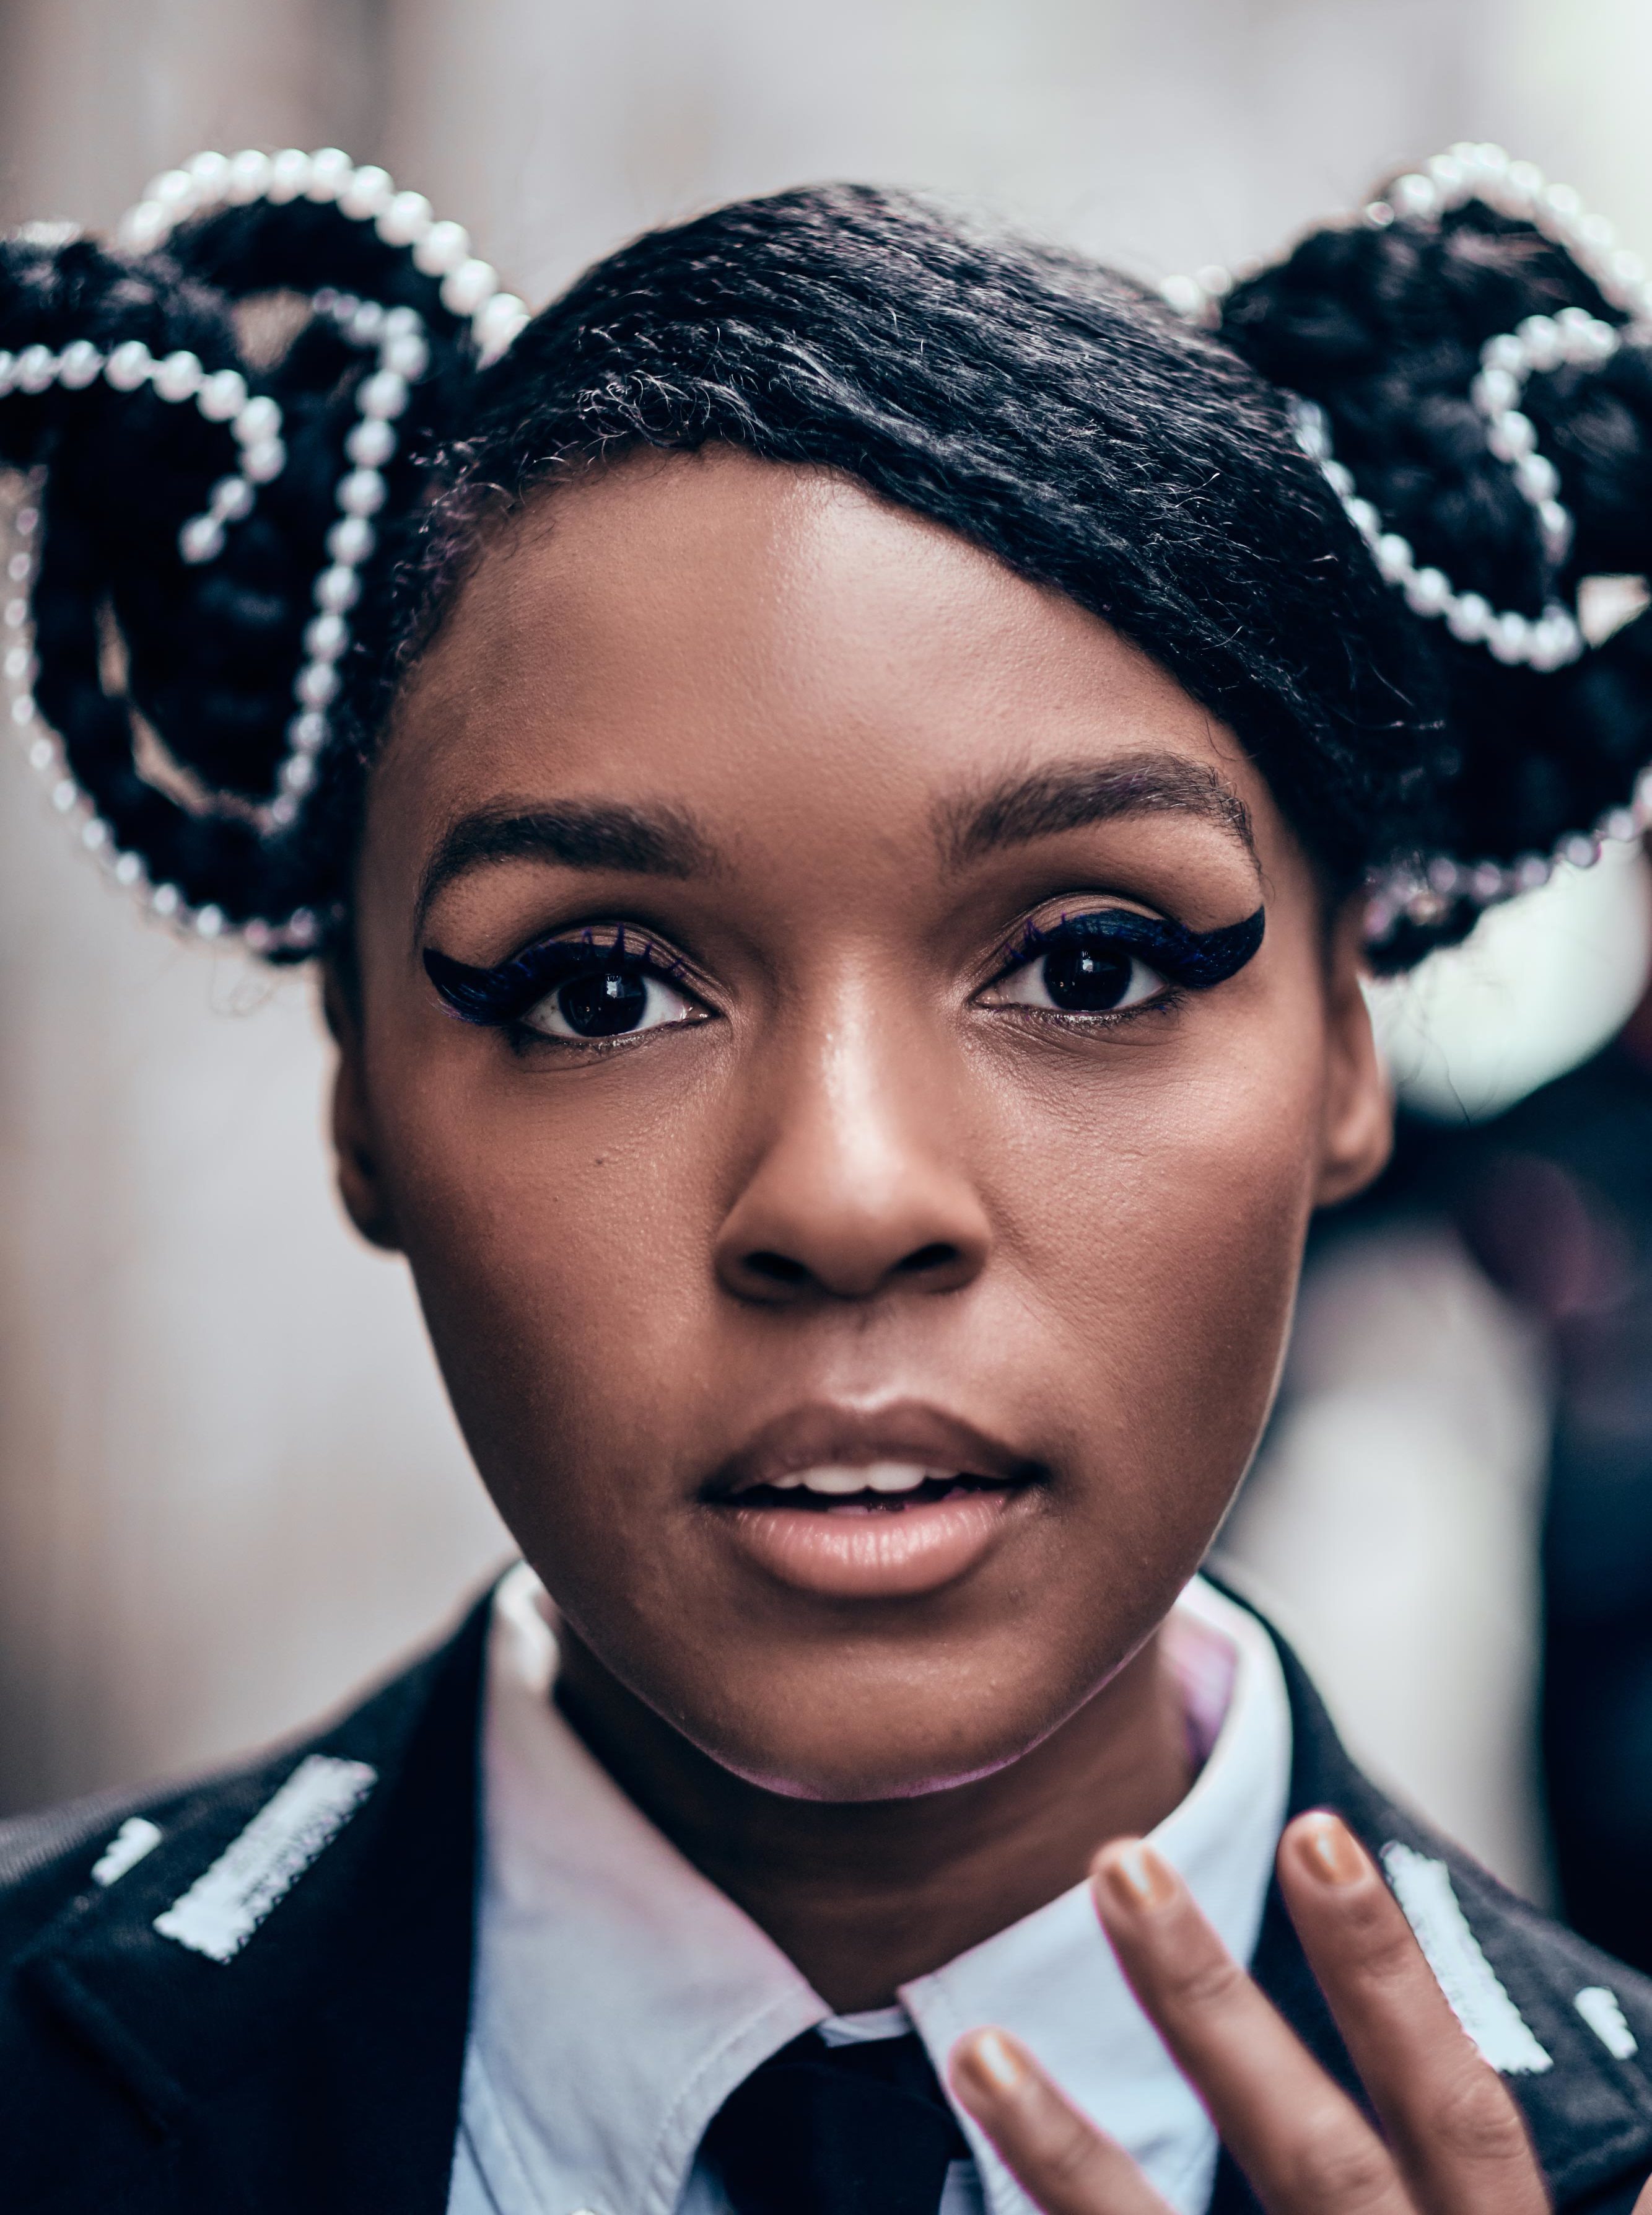 Janelle Monae on featuring in Rian Johnson's 'Knives Out' sequel: It is a dream role